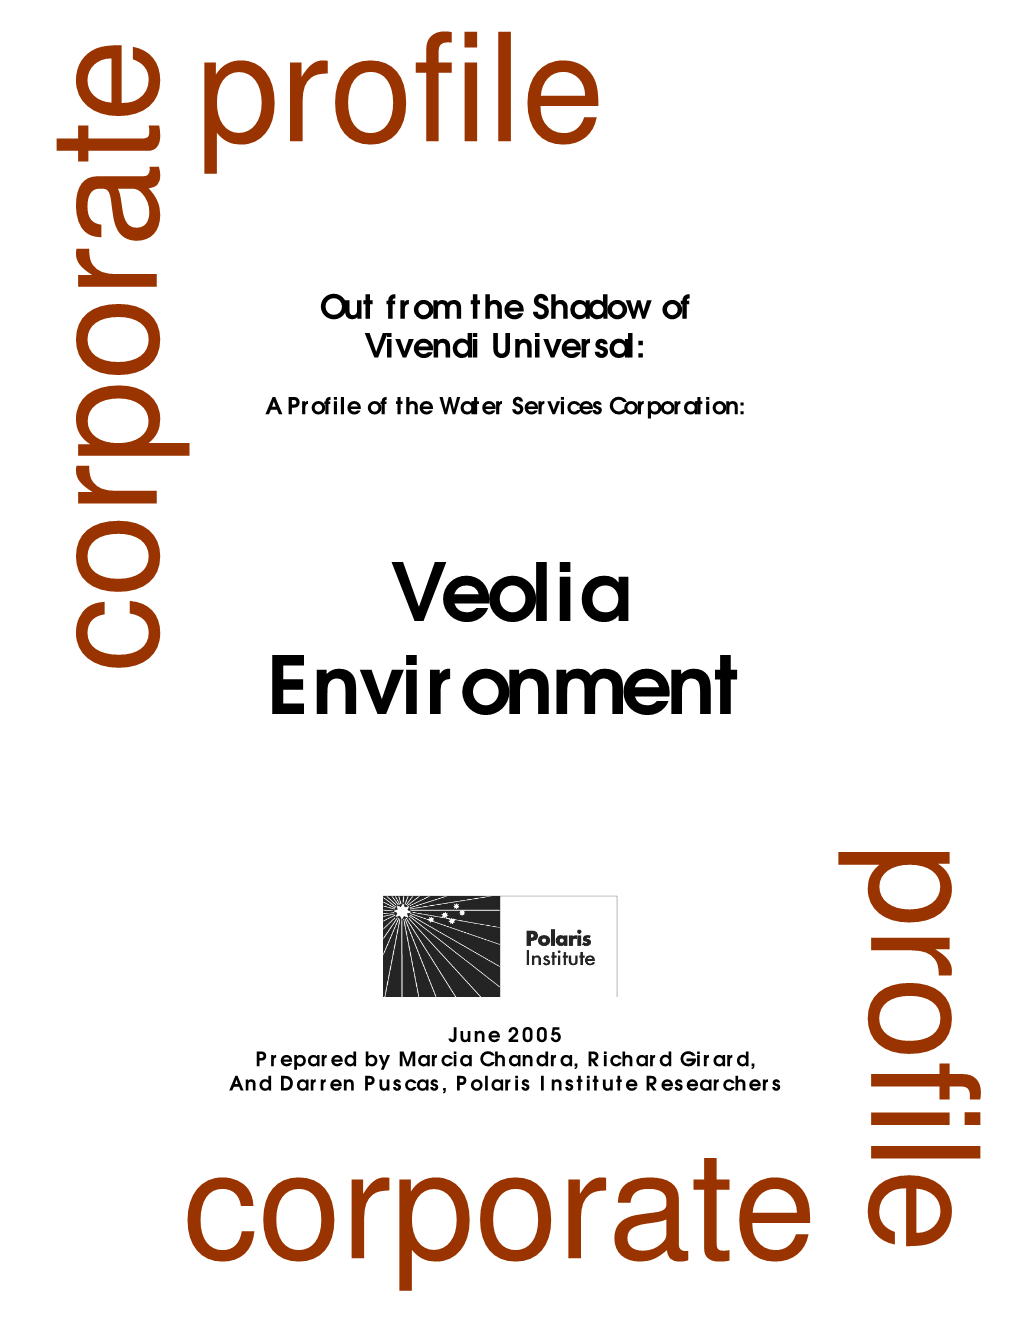 Veolia Environment, Which Was Known As Vivendi Environment Until 2003, Carries All of Vivendi’S History and Reputation Into Its New Corporate Entity.1